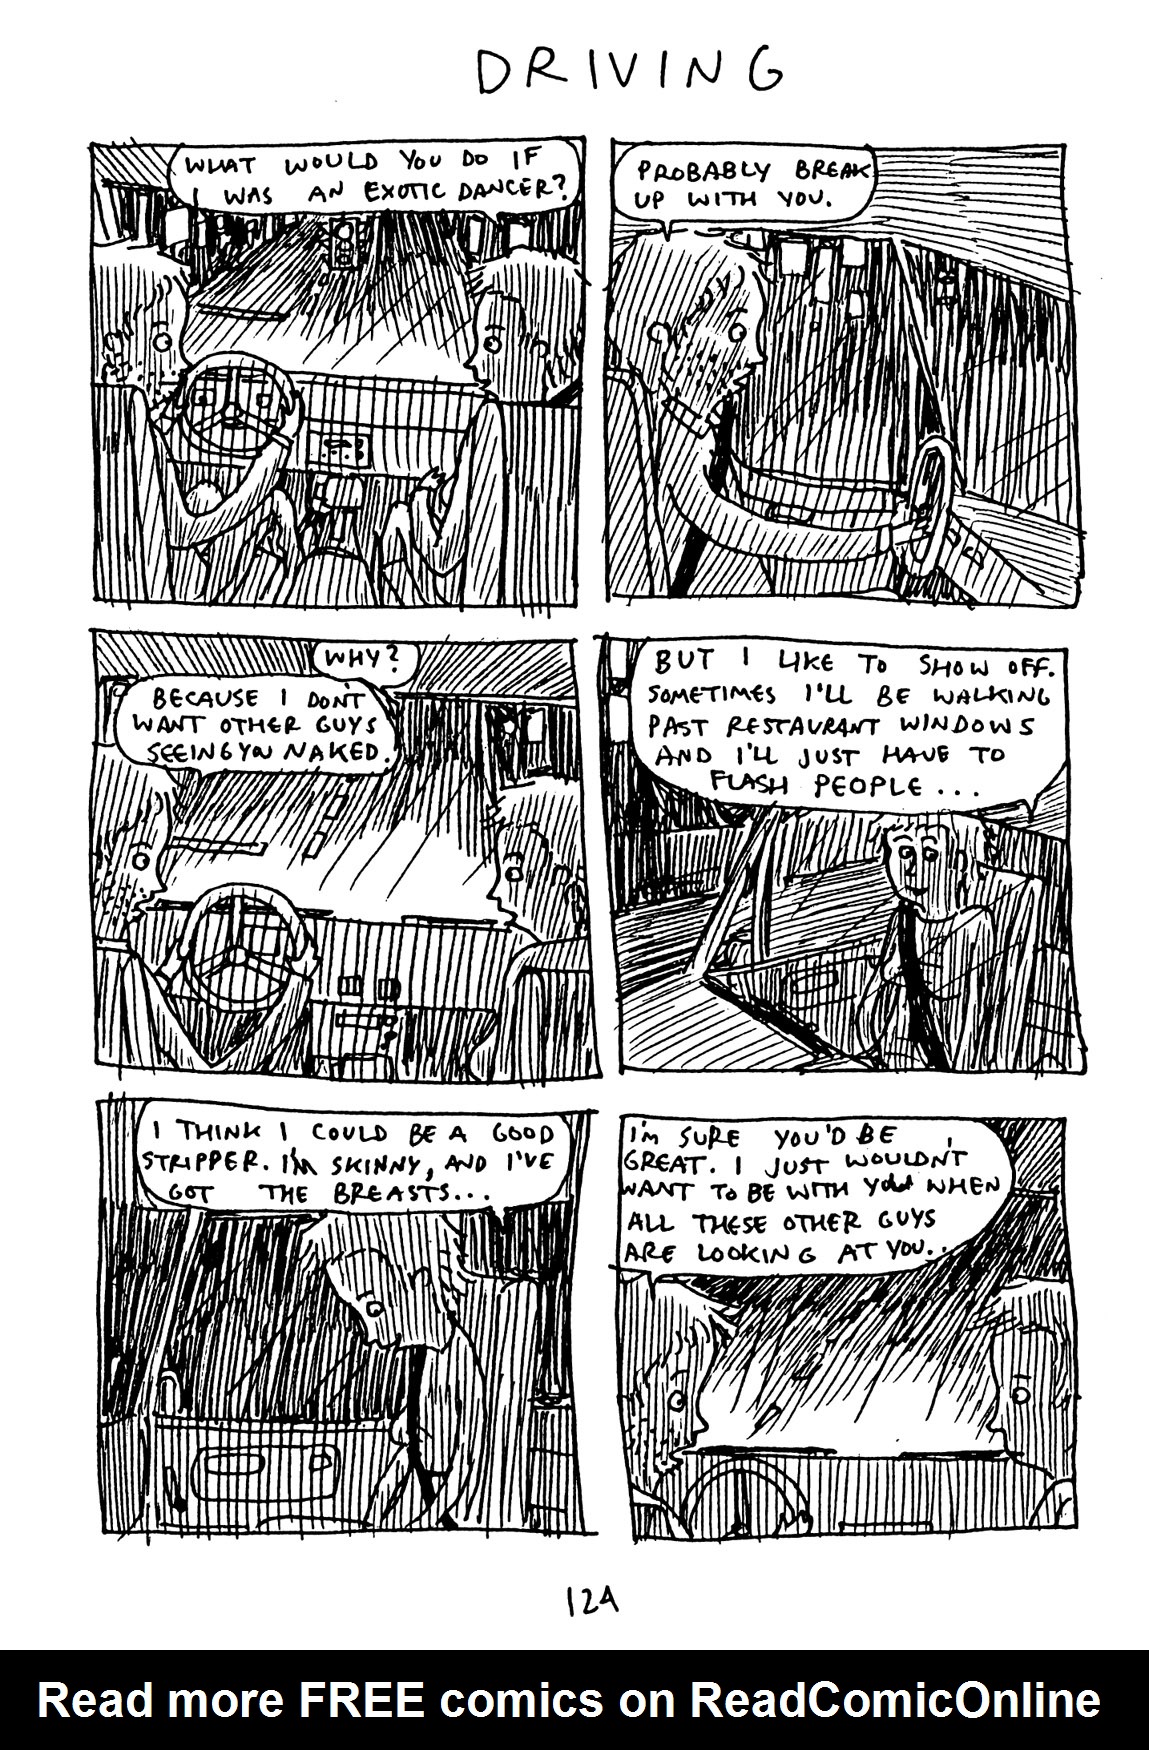 Read online Unlikely comic -  Issue # TPB (Part 2) - 38